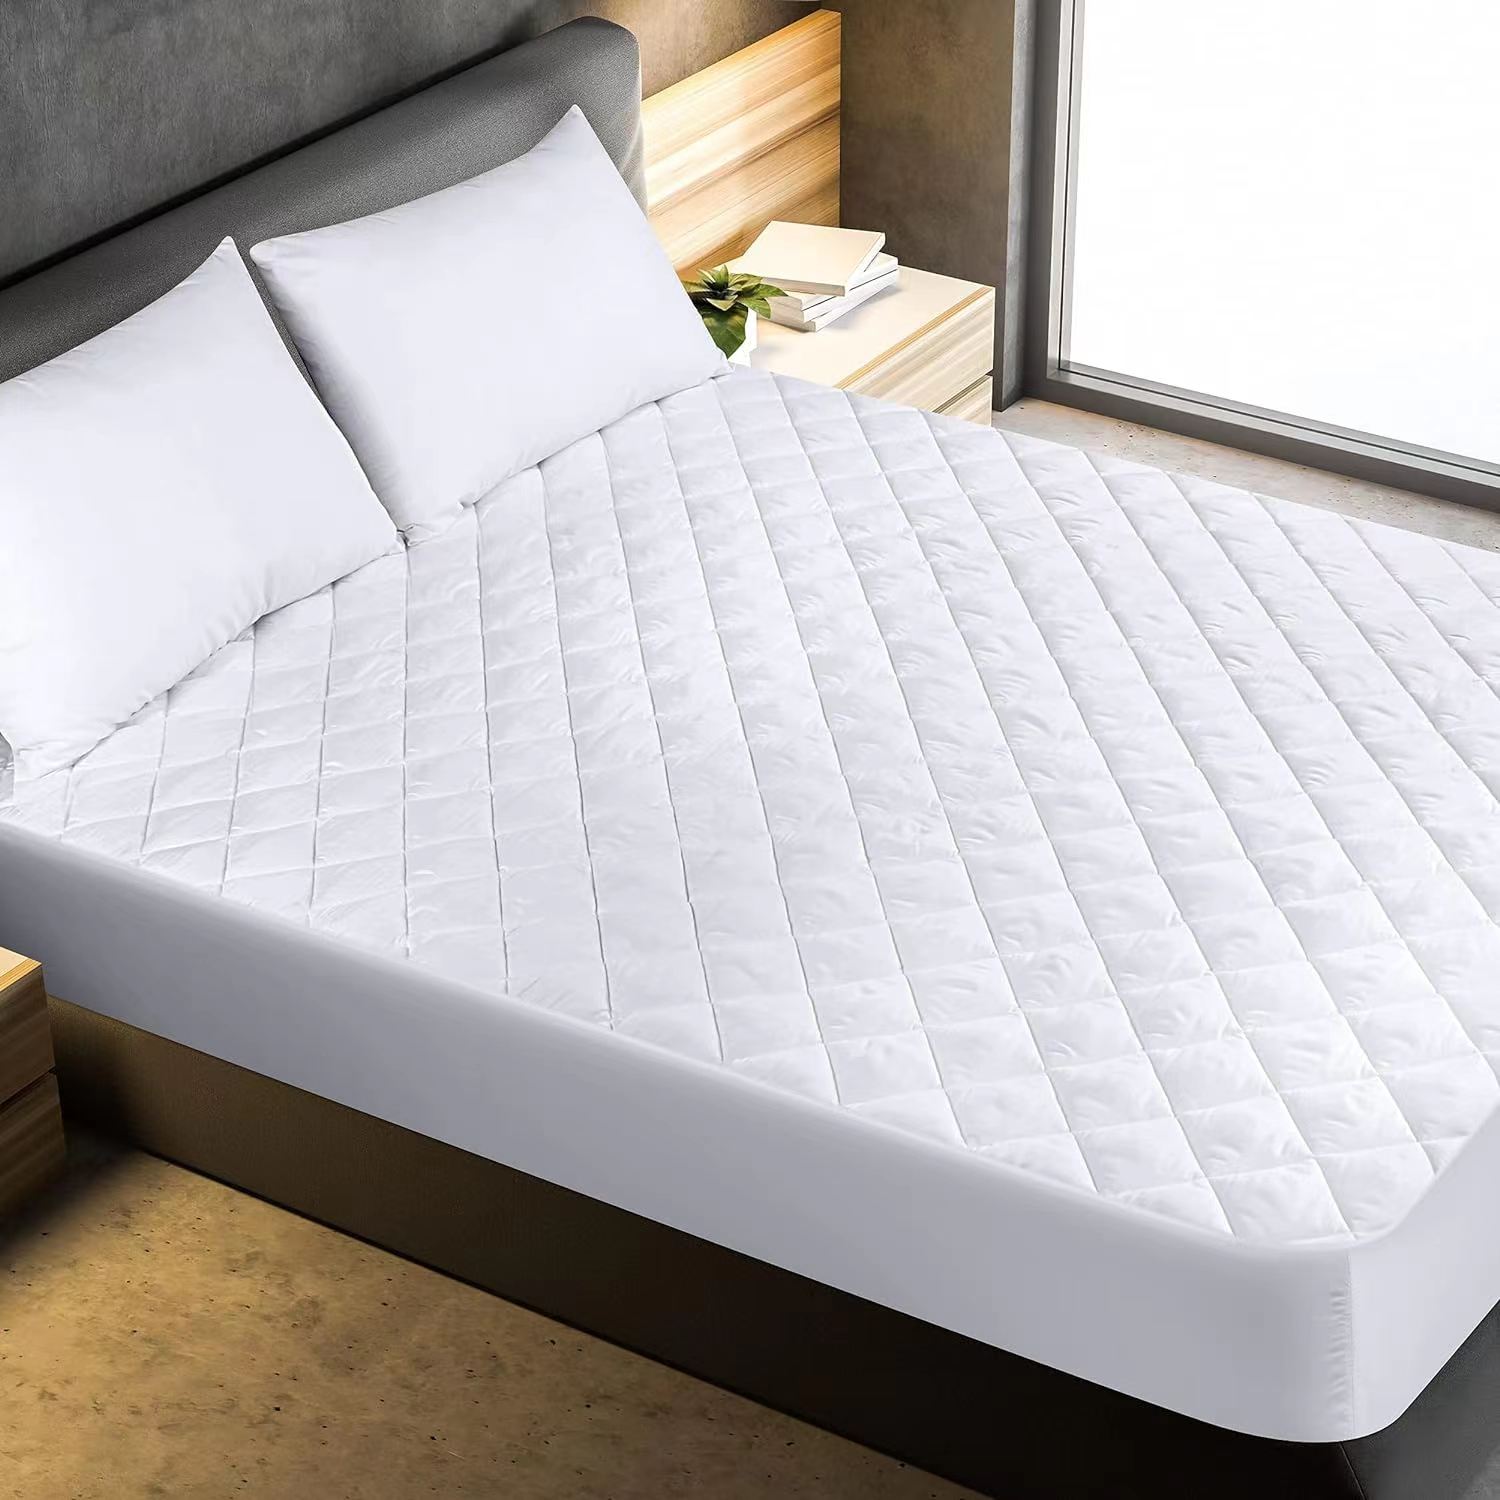 Antibacterial and anti-allergy quilted waterproof mattress pad